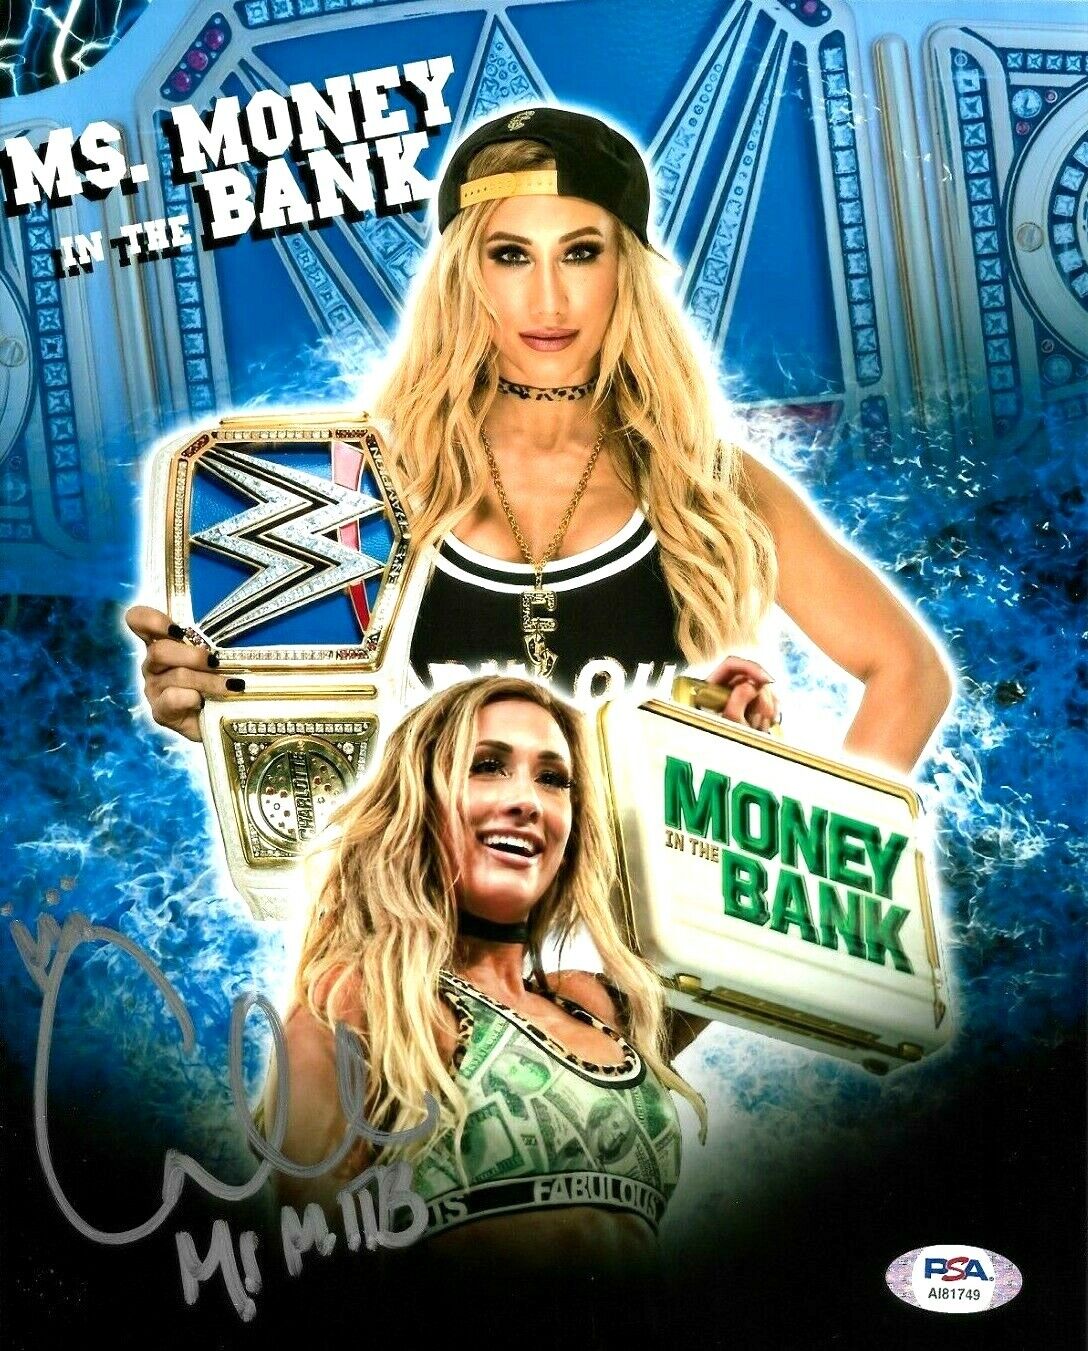 WWE CARMELLA HAND SIGNED AUTOGRAPHED 8X10 Photo Poster painting WITH PROOF AND PSA DNA COA 24